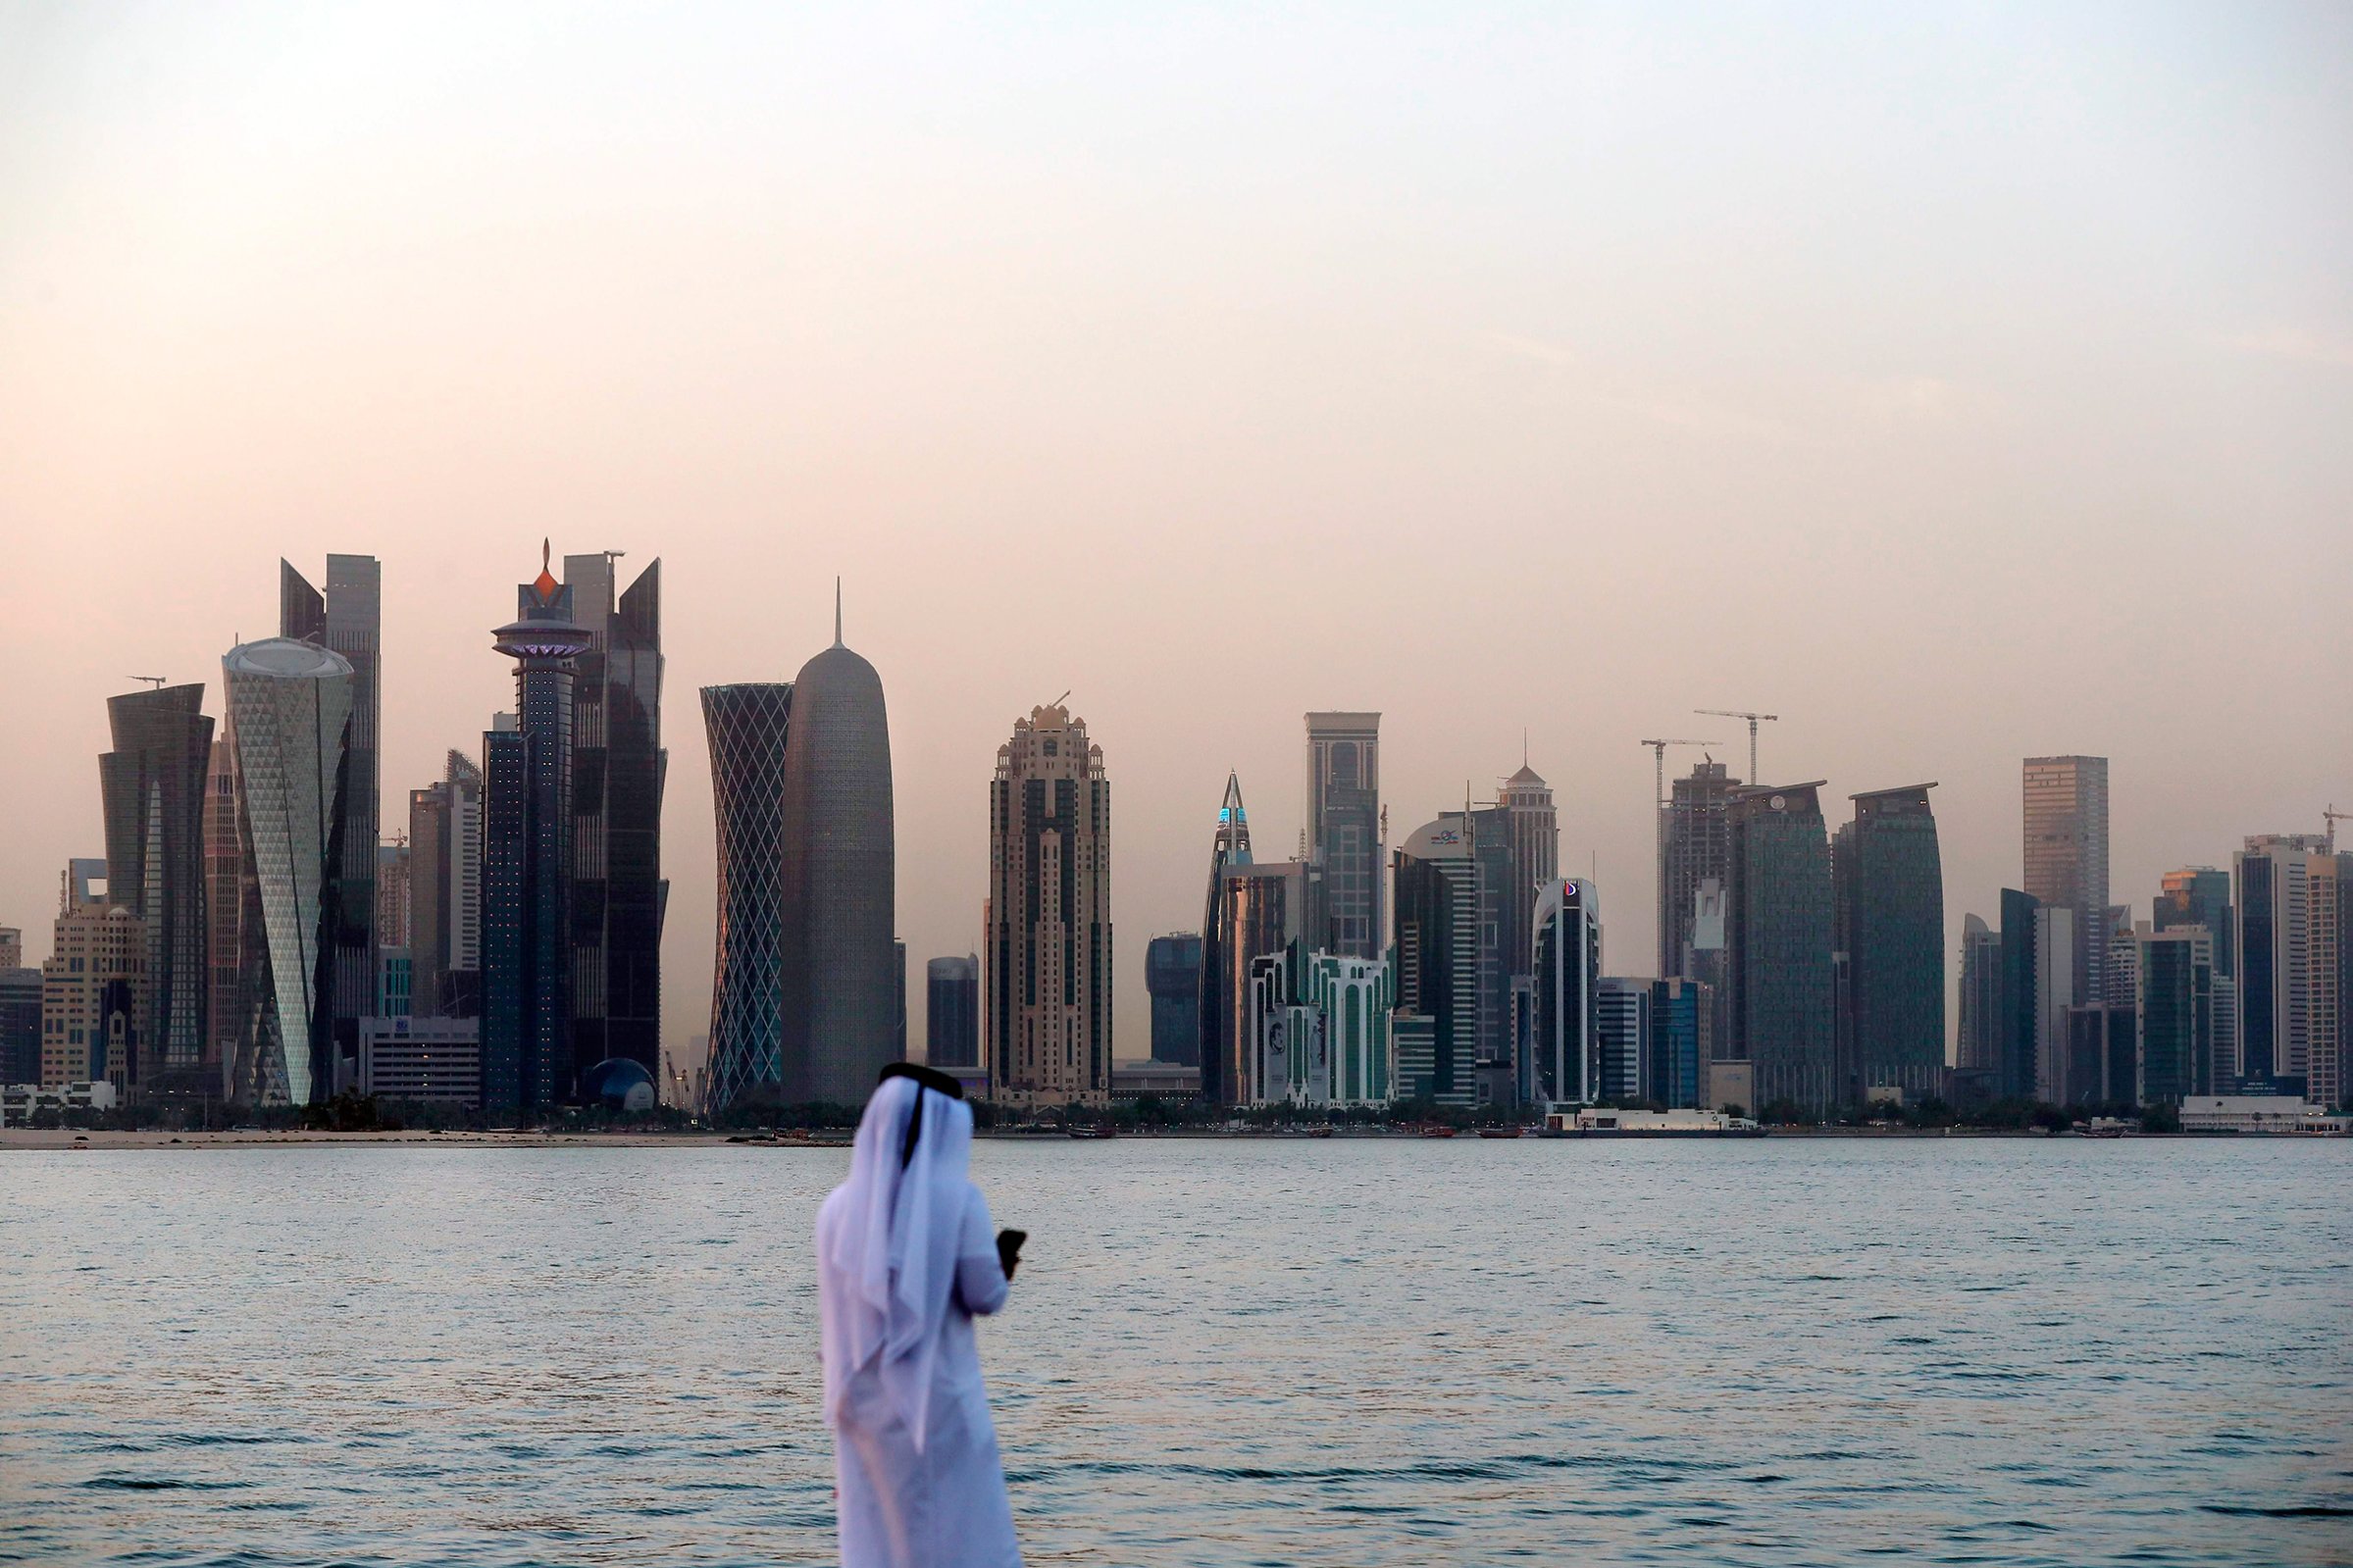 Life in Doha is relatively unchanged after weeks under a blockade